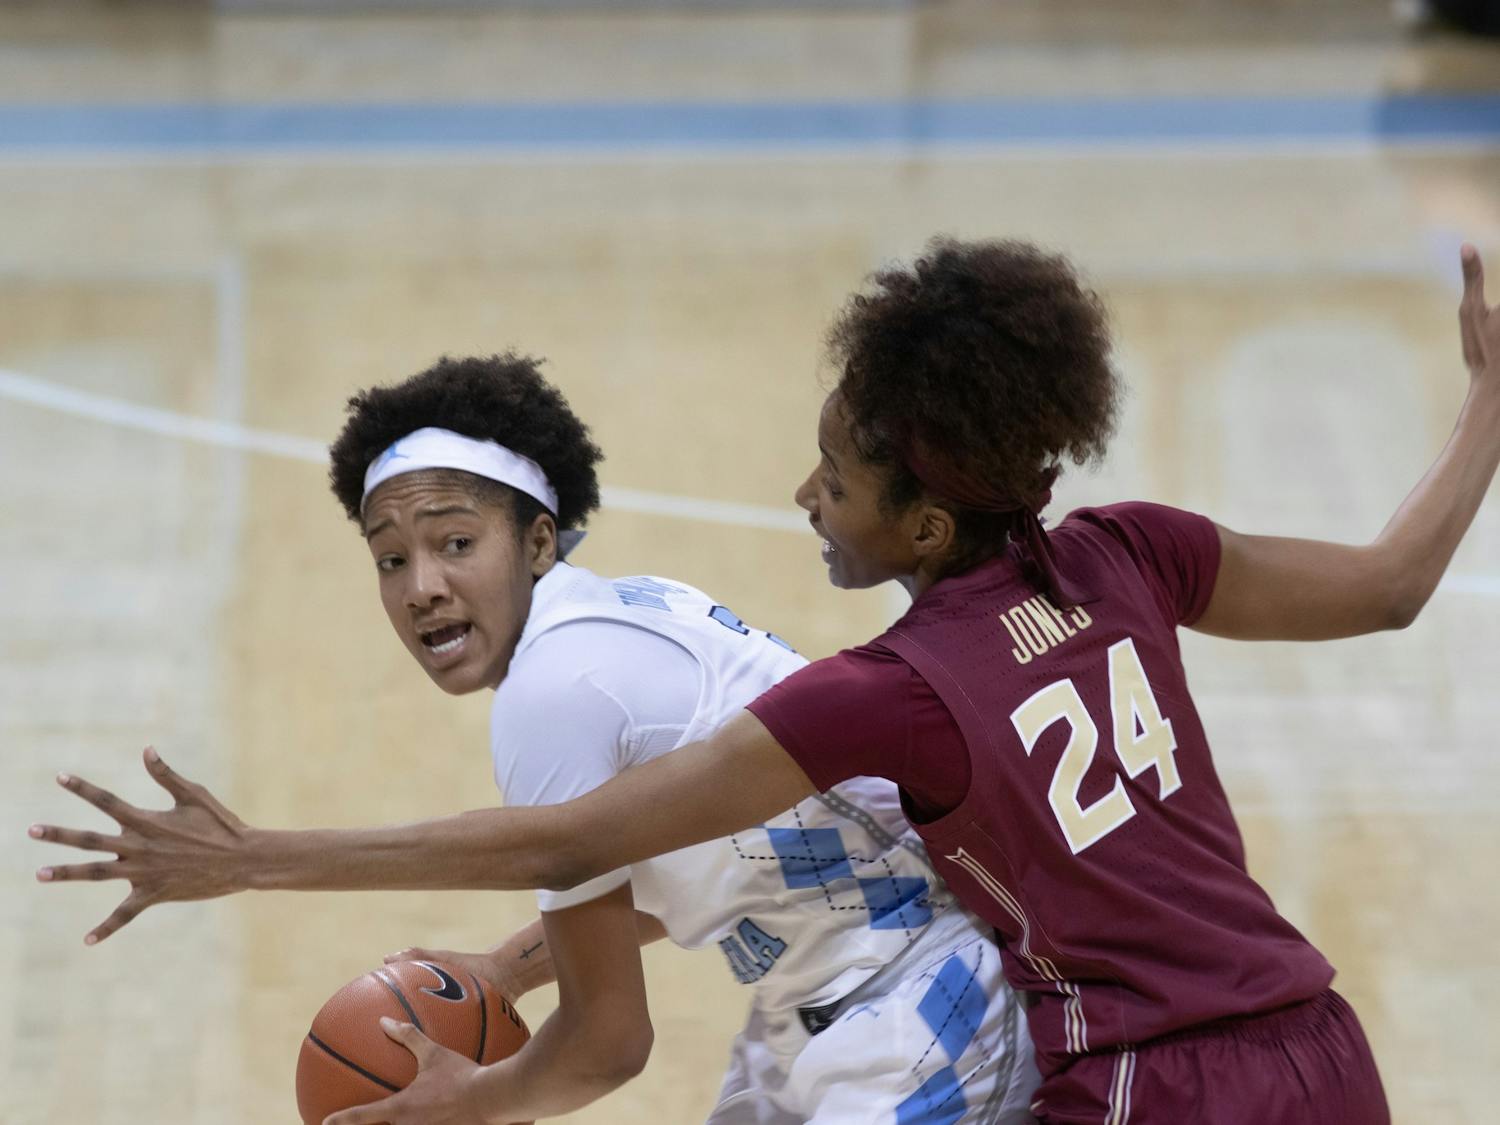 UNC freshman guard Kennedy Todd-Williams (3)  looks to pass the ball against Florida State junior guard Morgan Jones (24) on Thursday, Feb. 4, 2021. UNC fell to Florida State 61-51